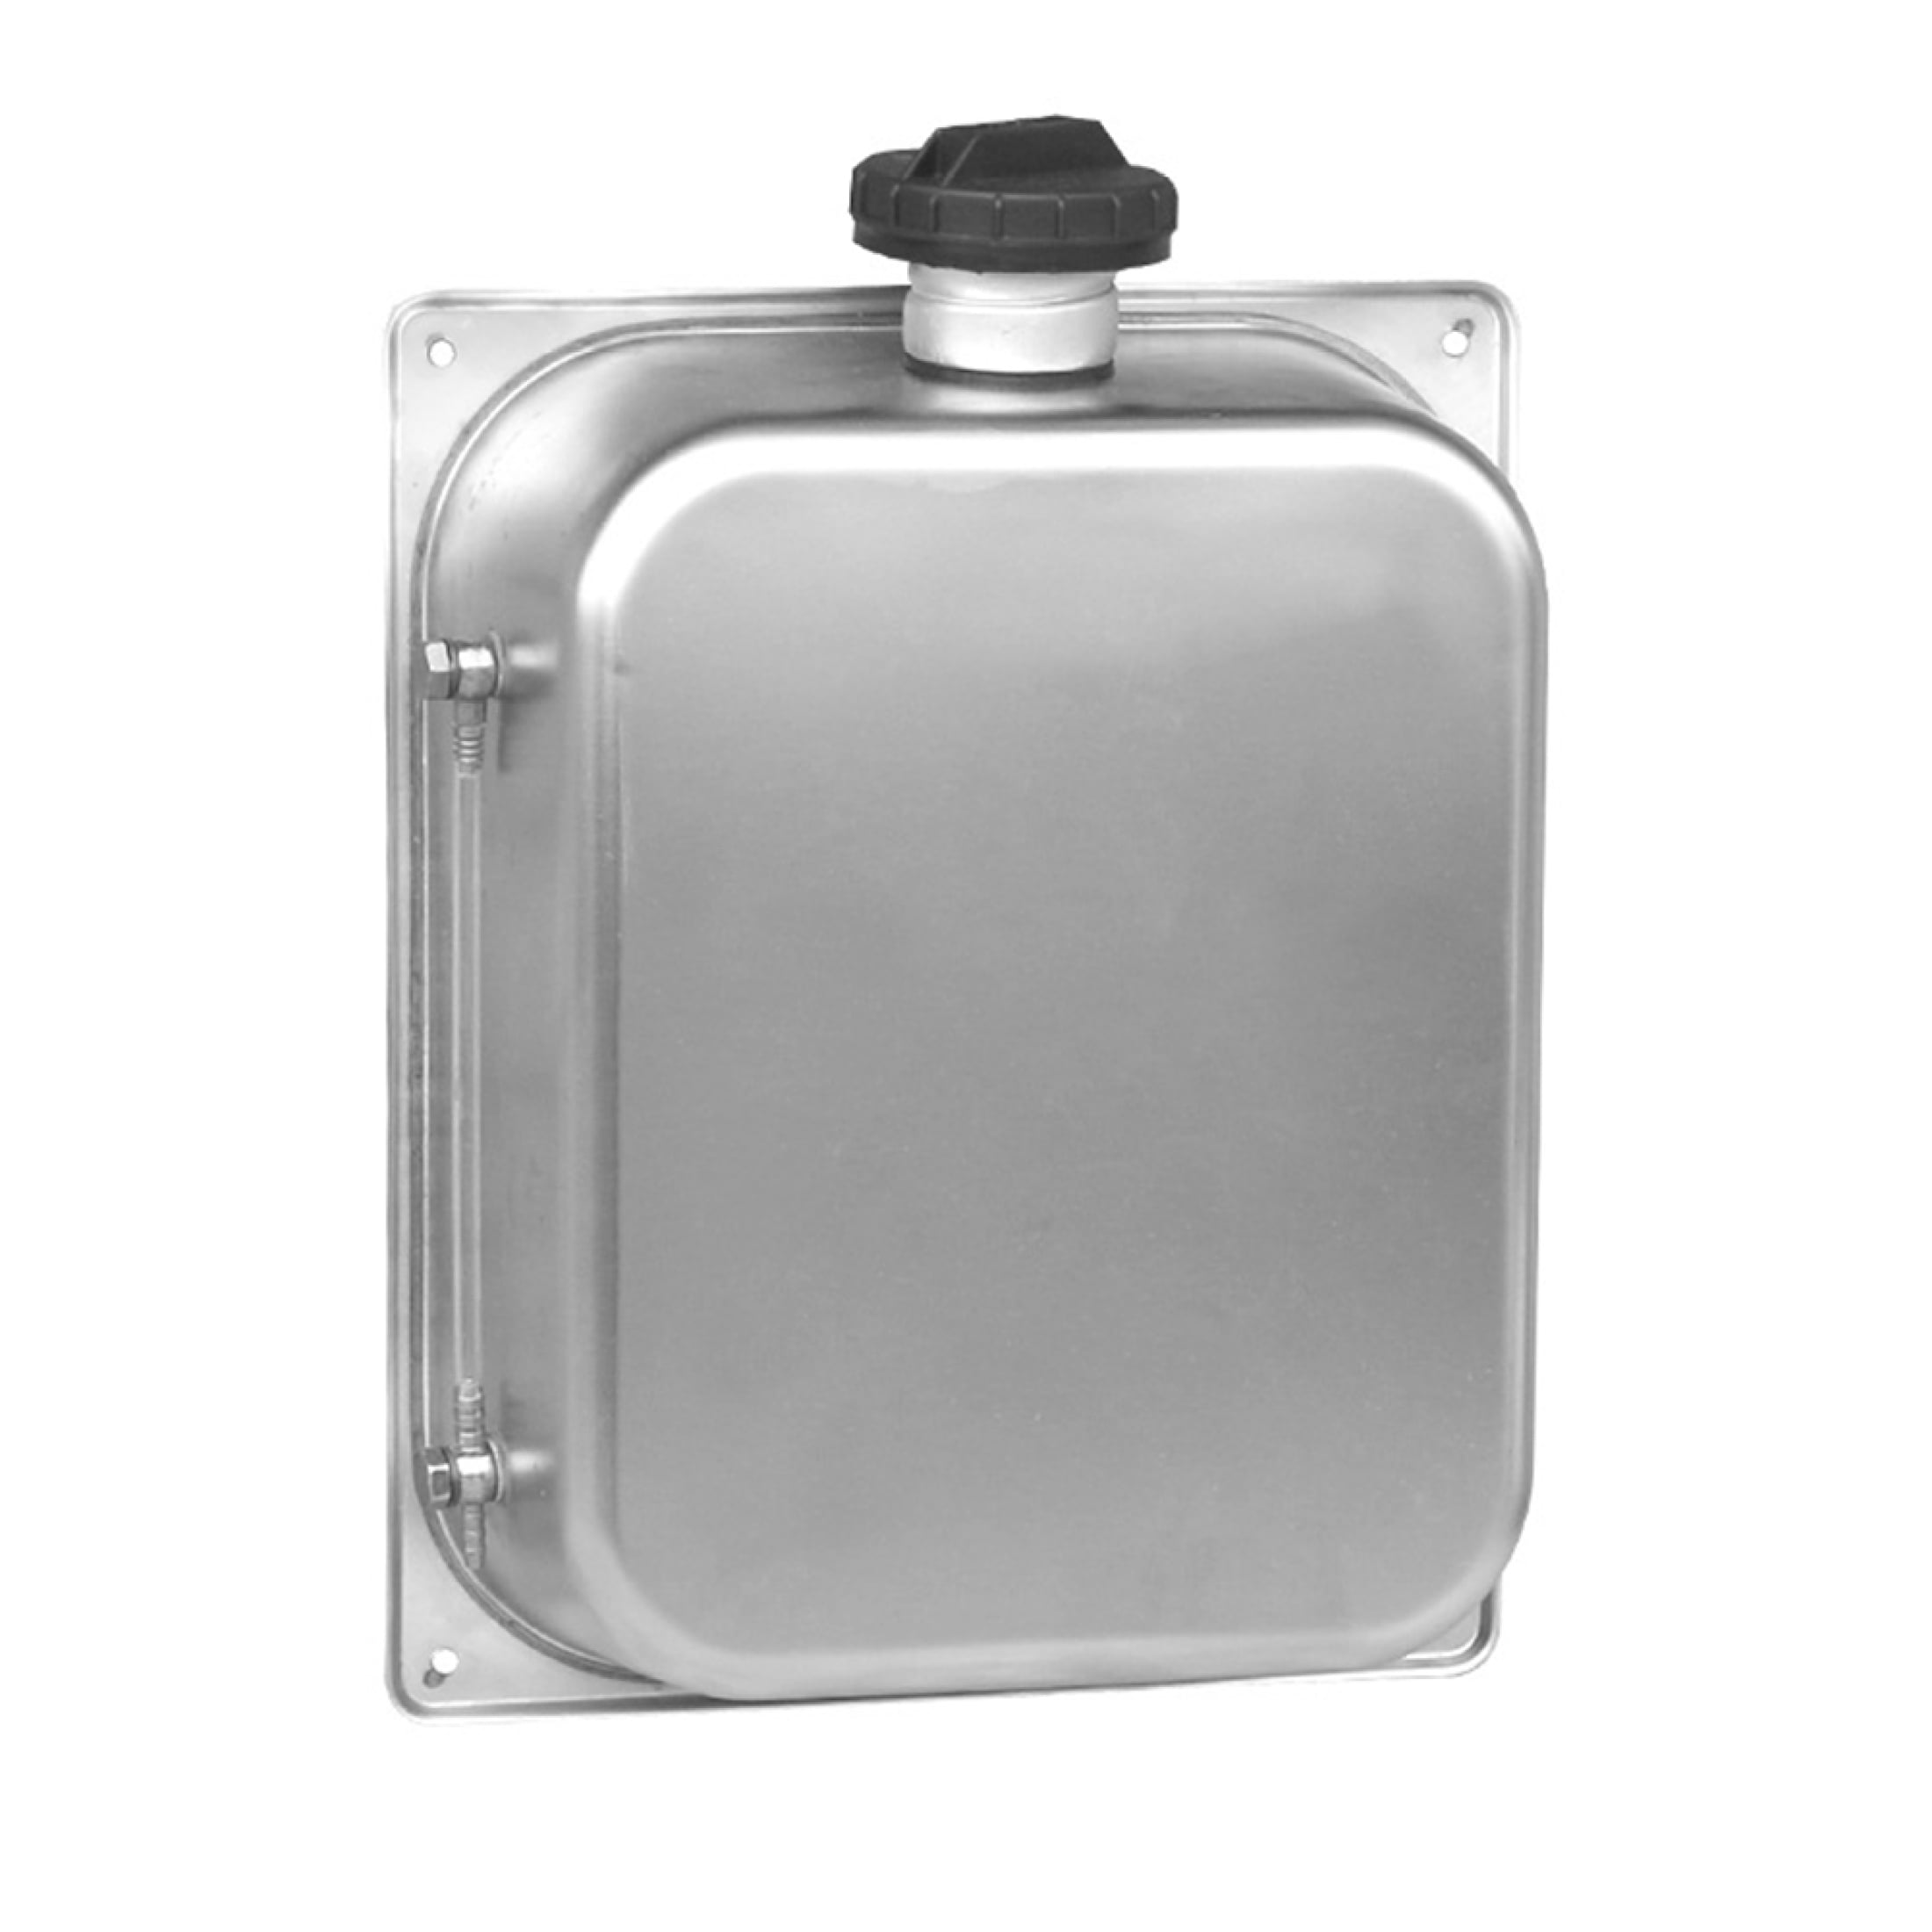 MoreChioce Stainless Steel Petrol Tank 7L Portable Petrol Can for